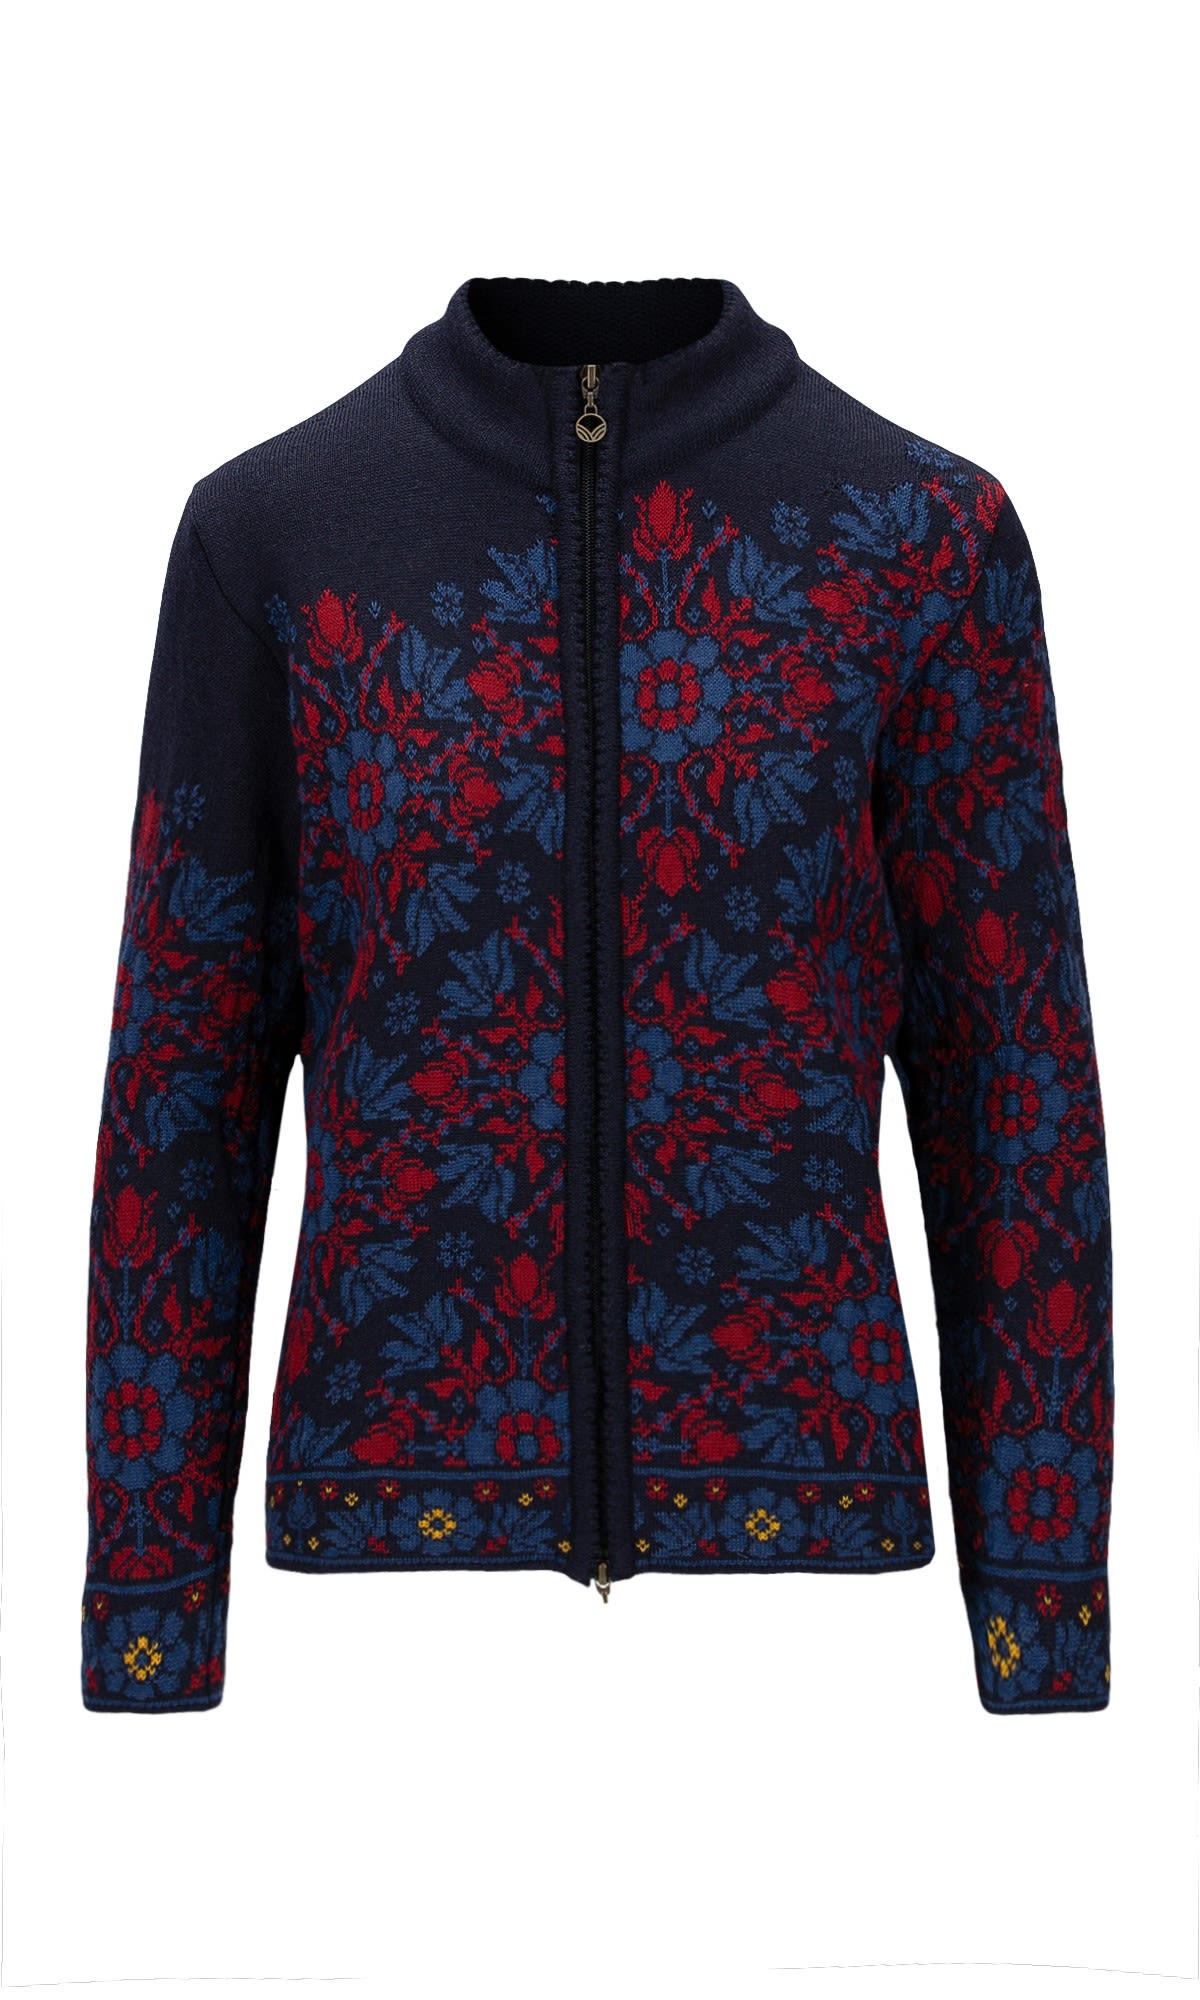 Dale of Norway Warme traditionelle Damen Woll Jacke Navy - Indigo - Red Rose